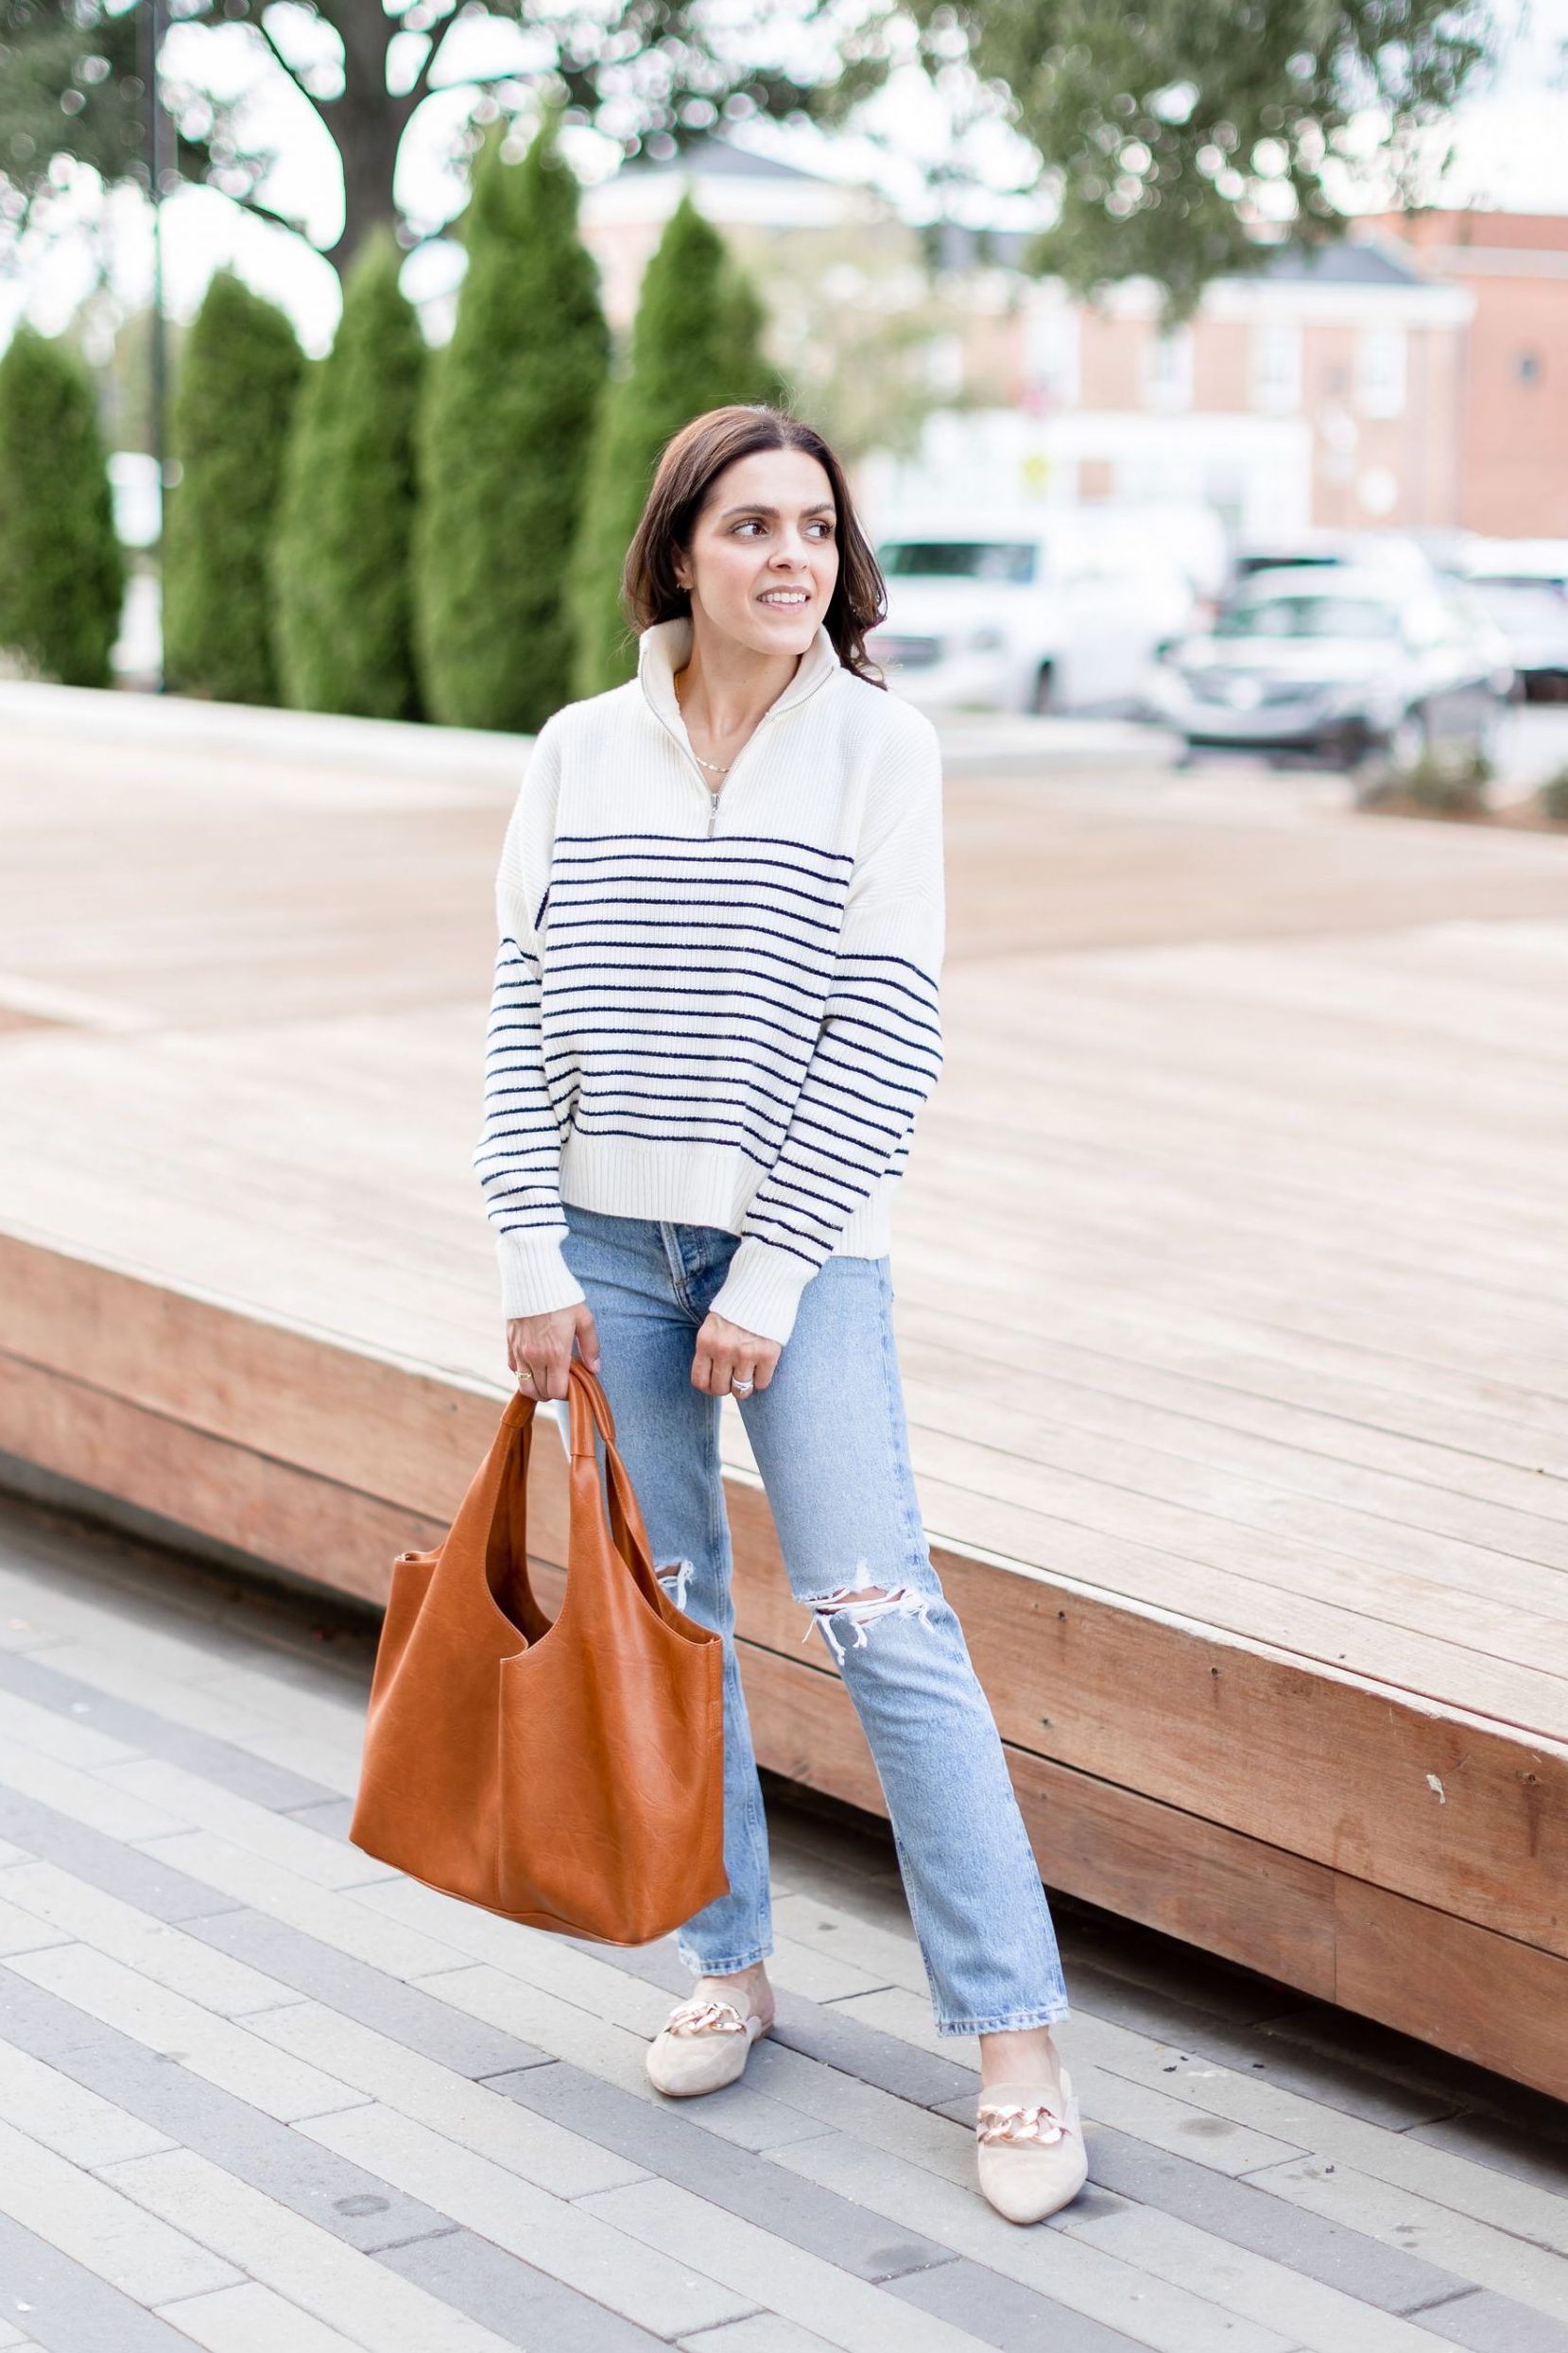 Stripe pullover distressed Agolde jeans Sept outfit idea